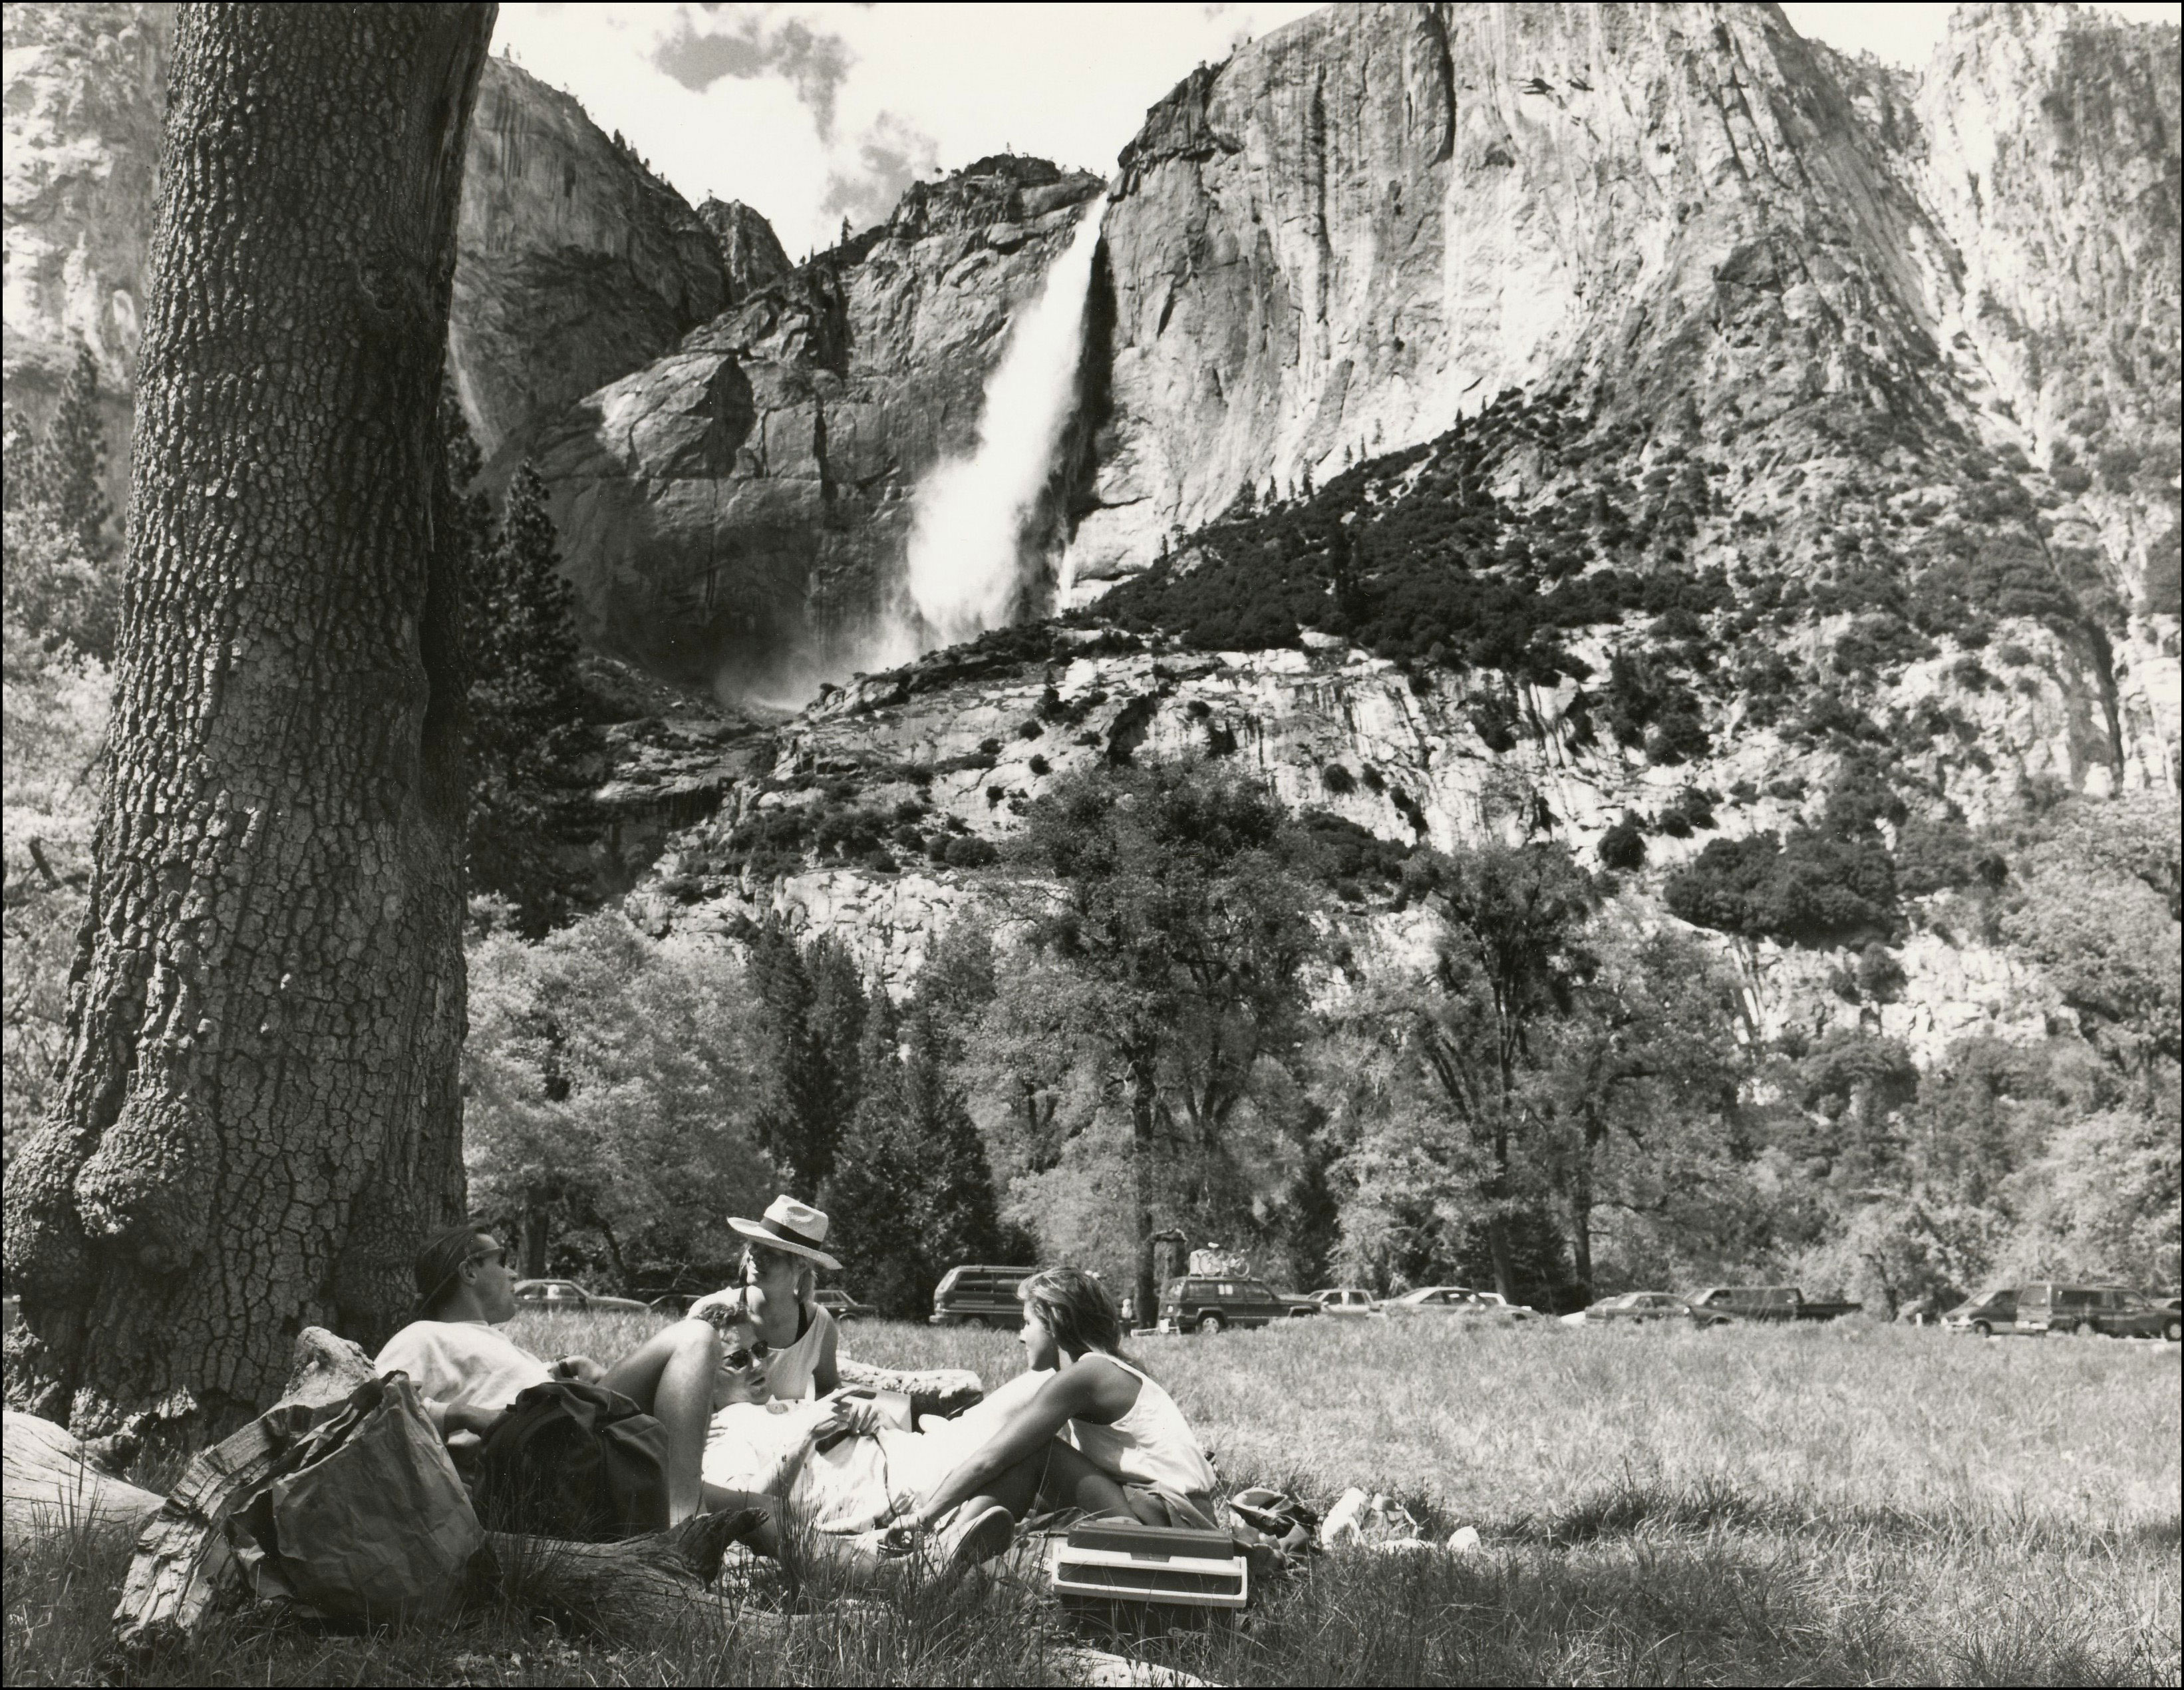 Two people sitting under a big tree having a picnic. View of parking lot in front of mountain with waterfall